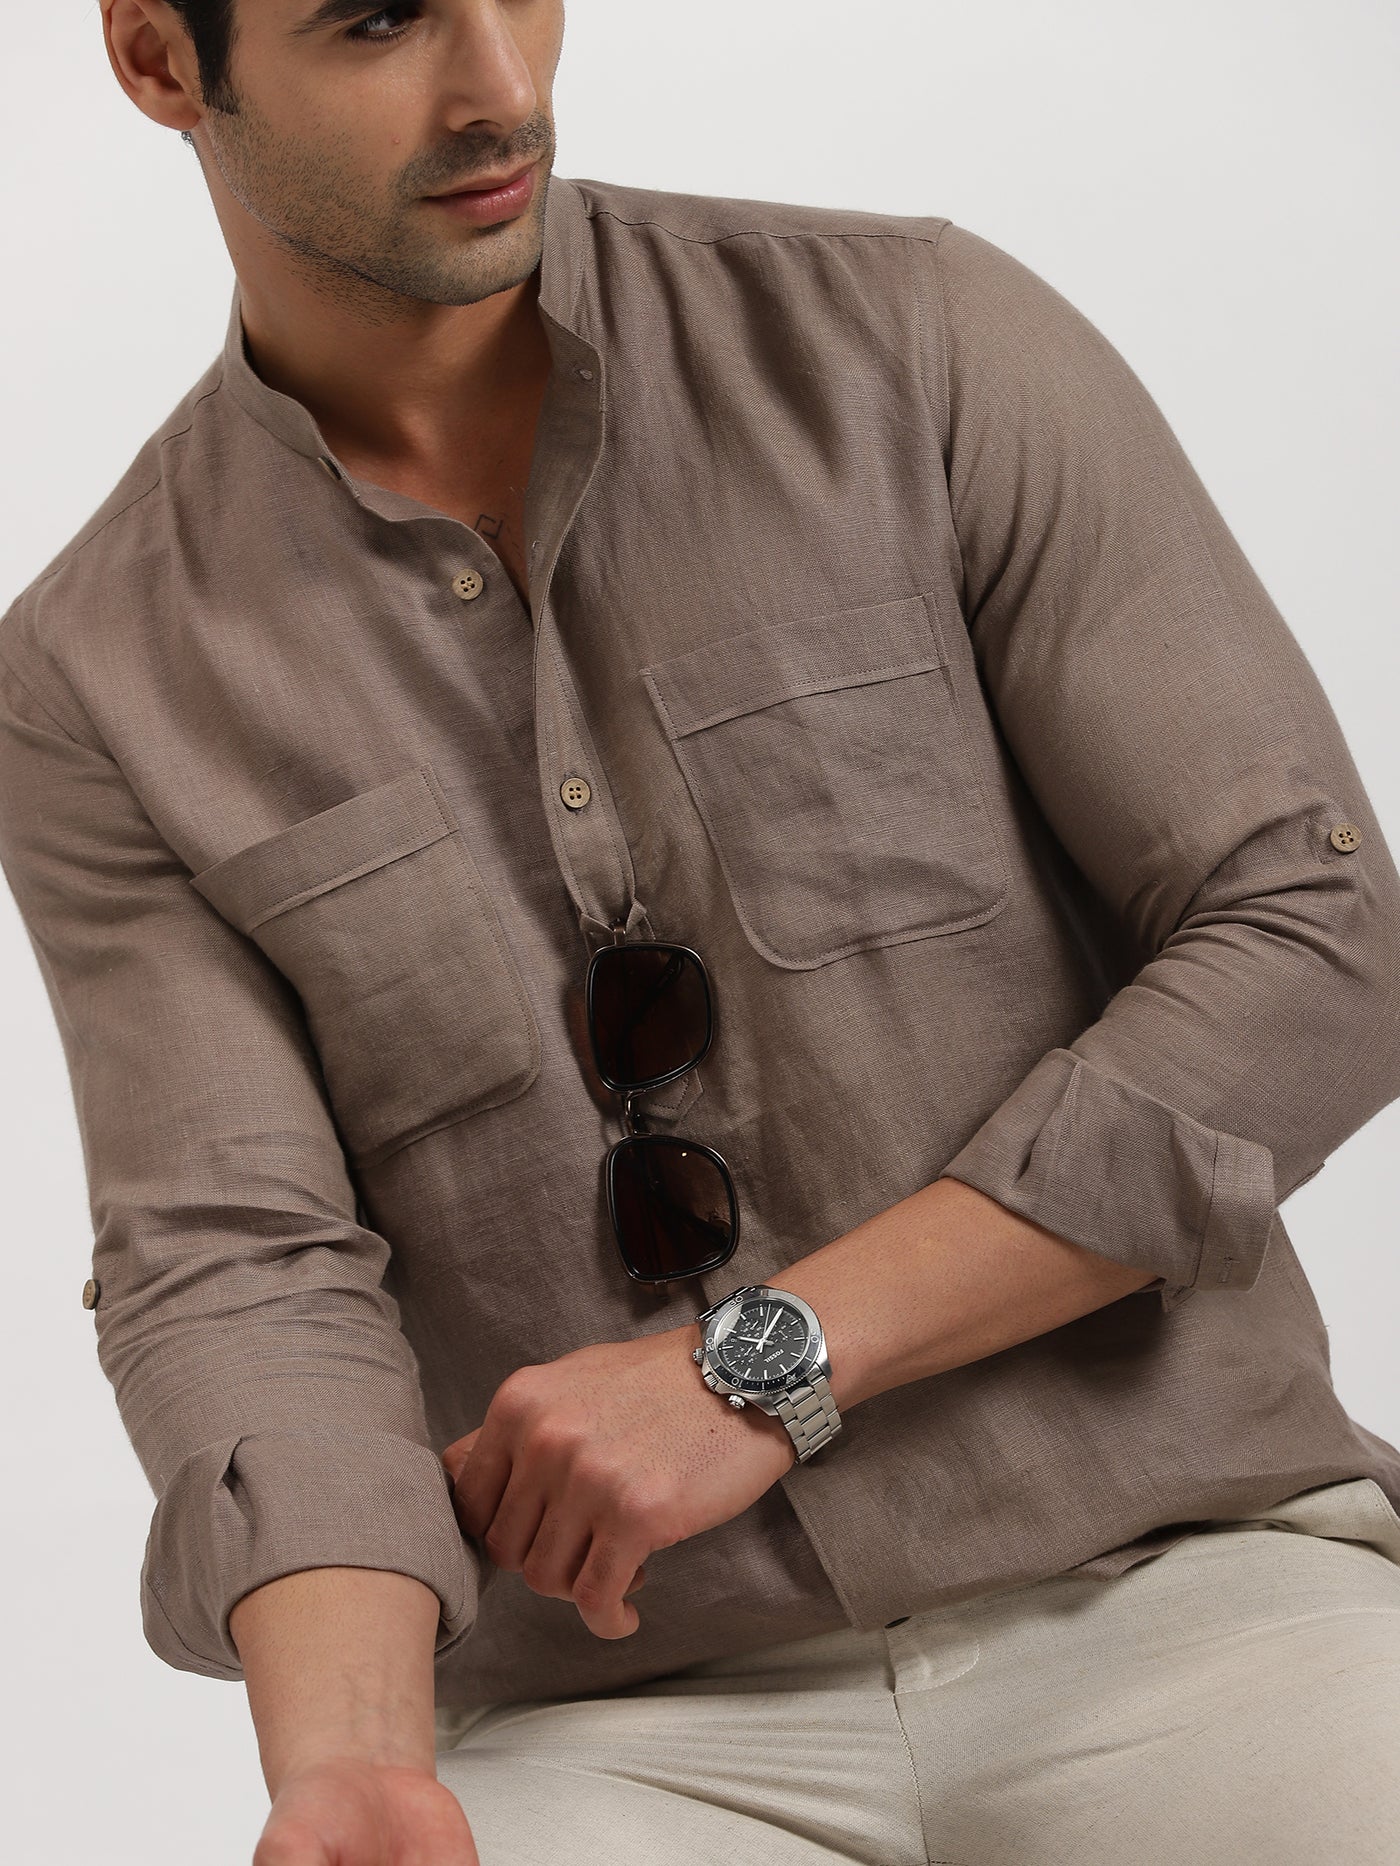 Luca - Pure Linen Double Pocket Full Sleeve Shirt - Sepia Brown